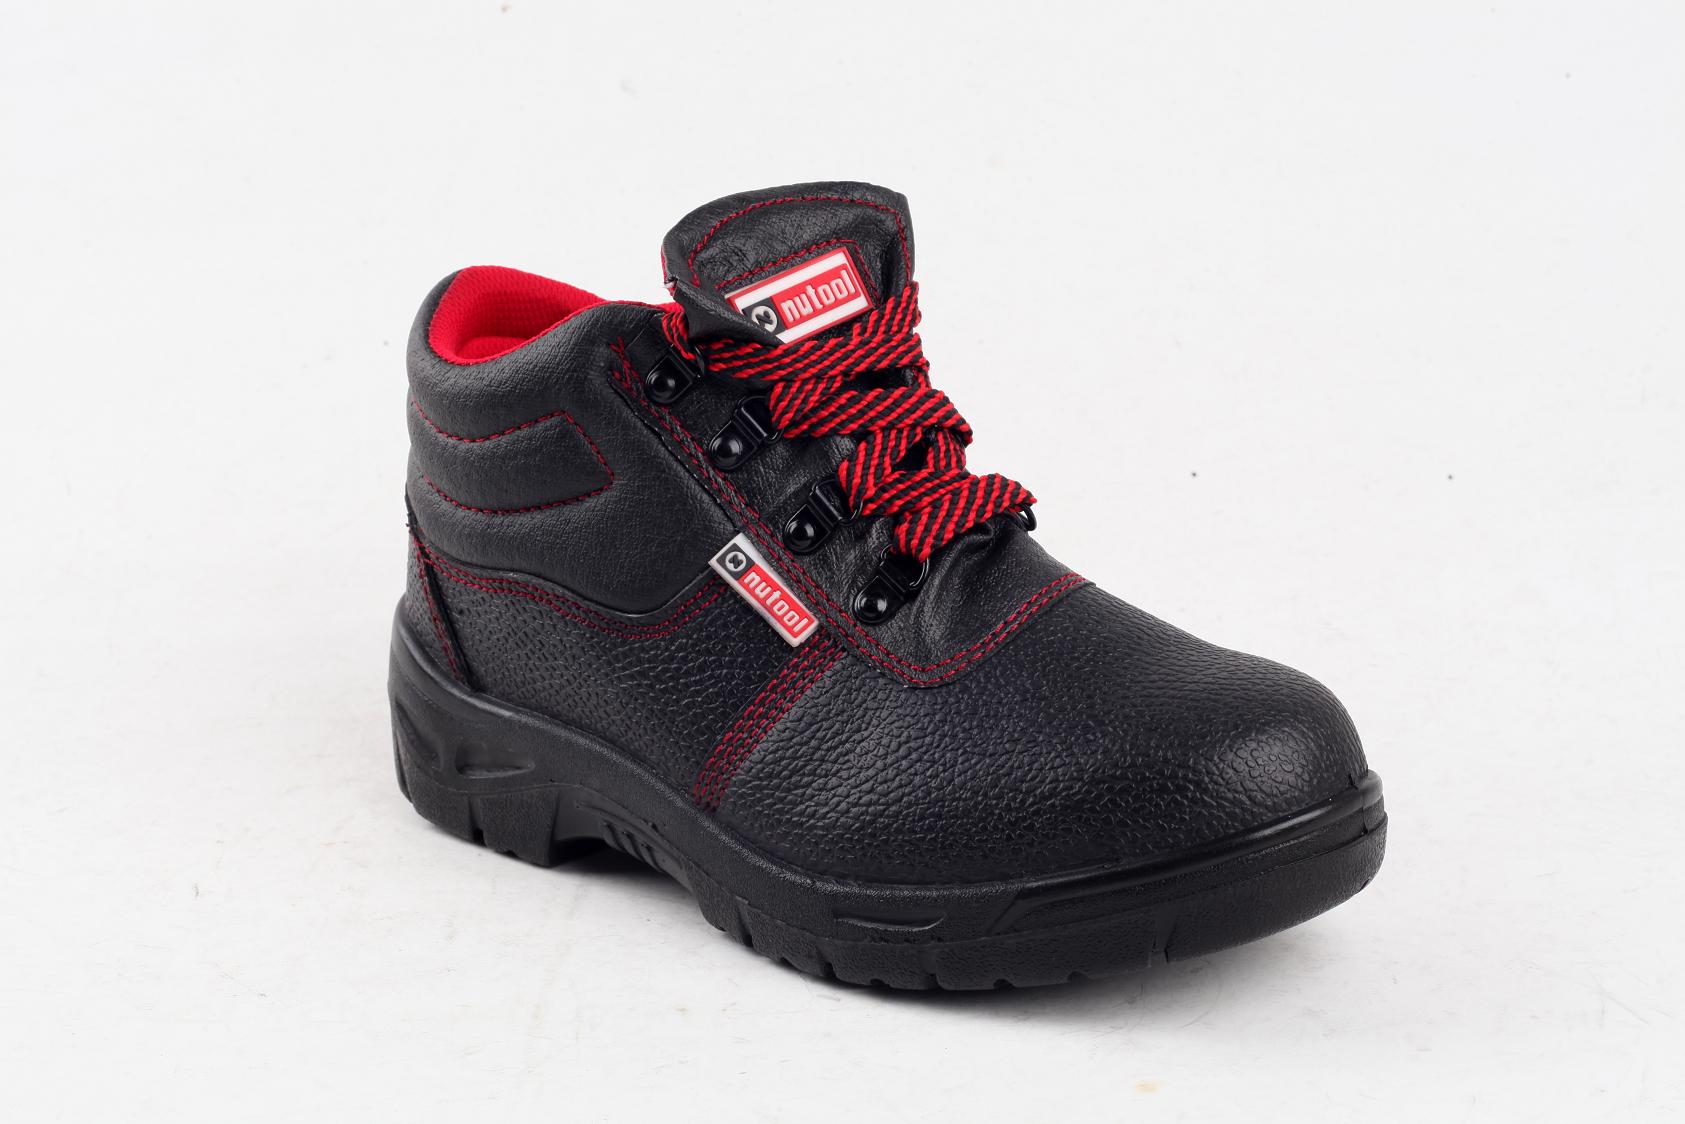 Safety Shoes - One stop purchase, full 